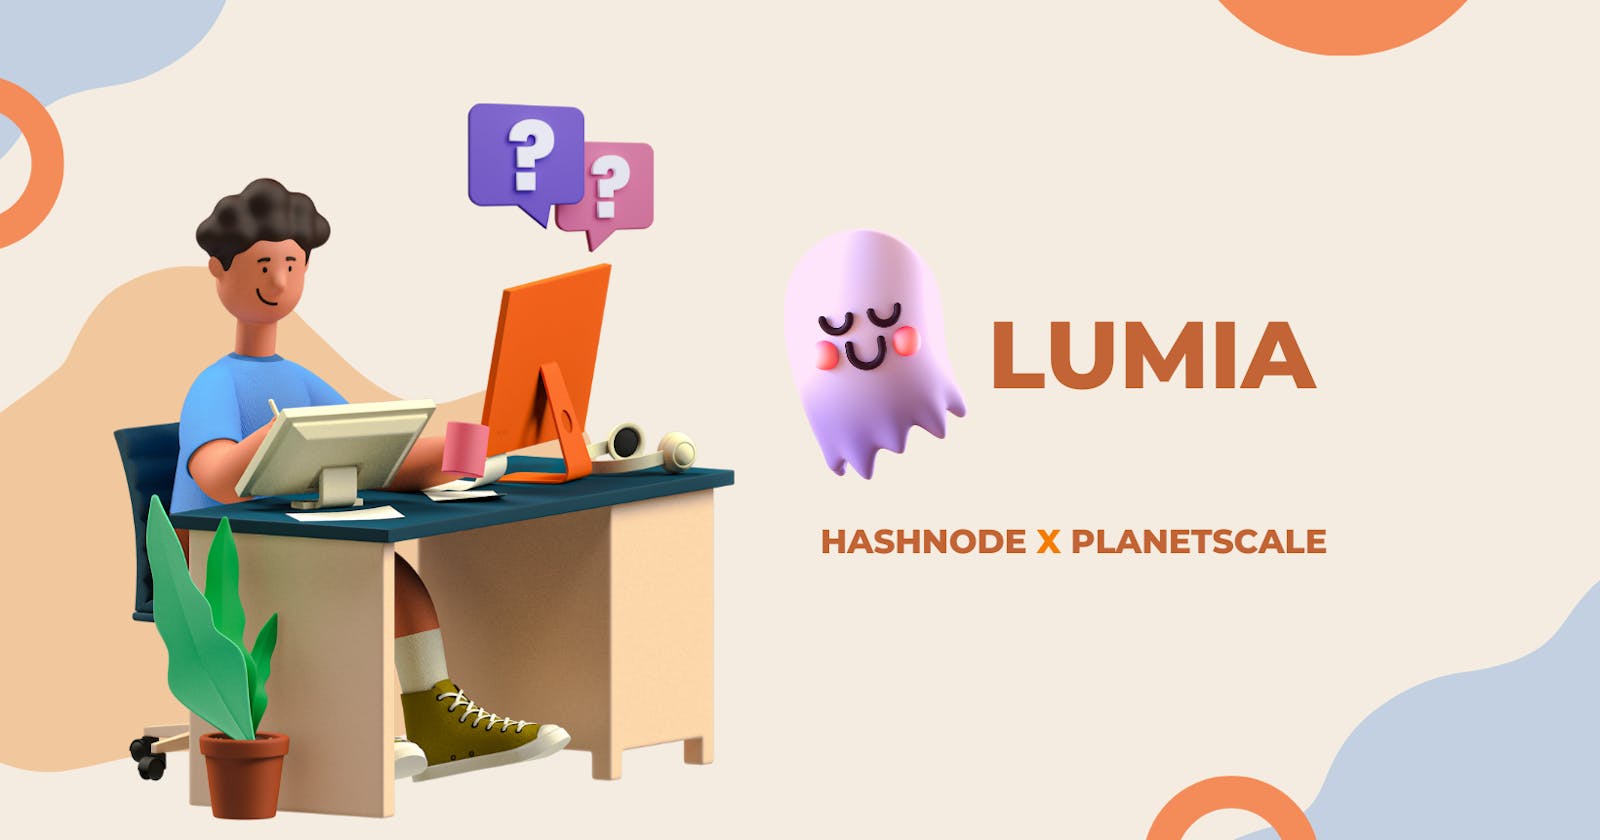 Presenting Lumia : Being a student made easy